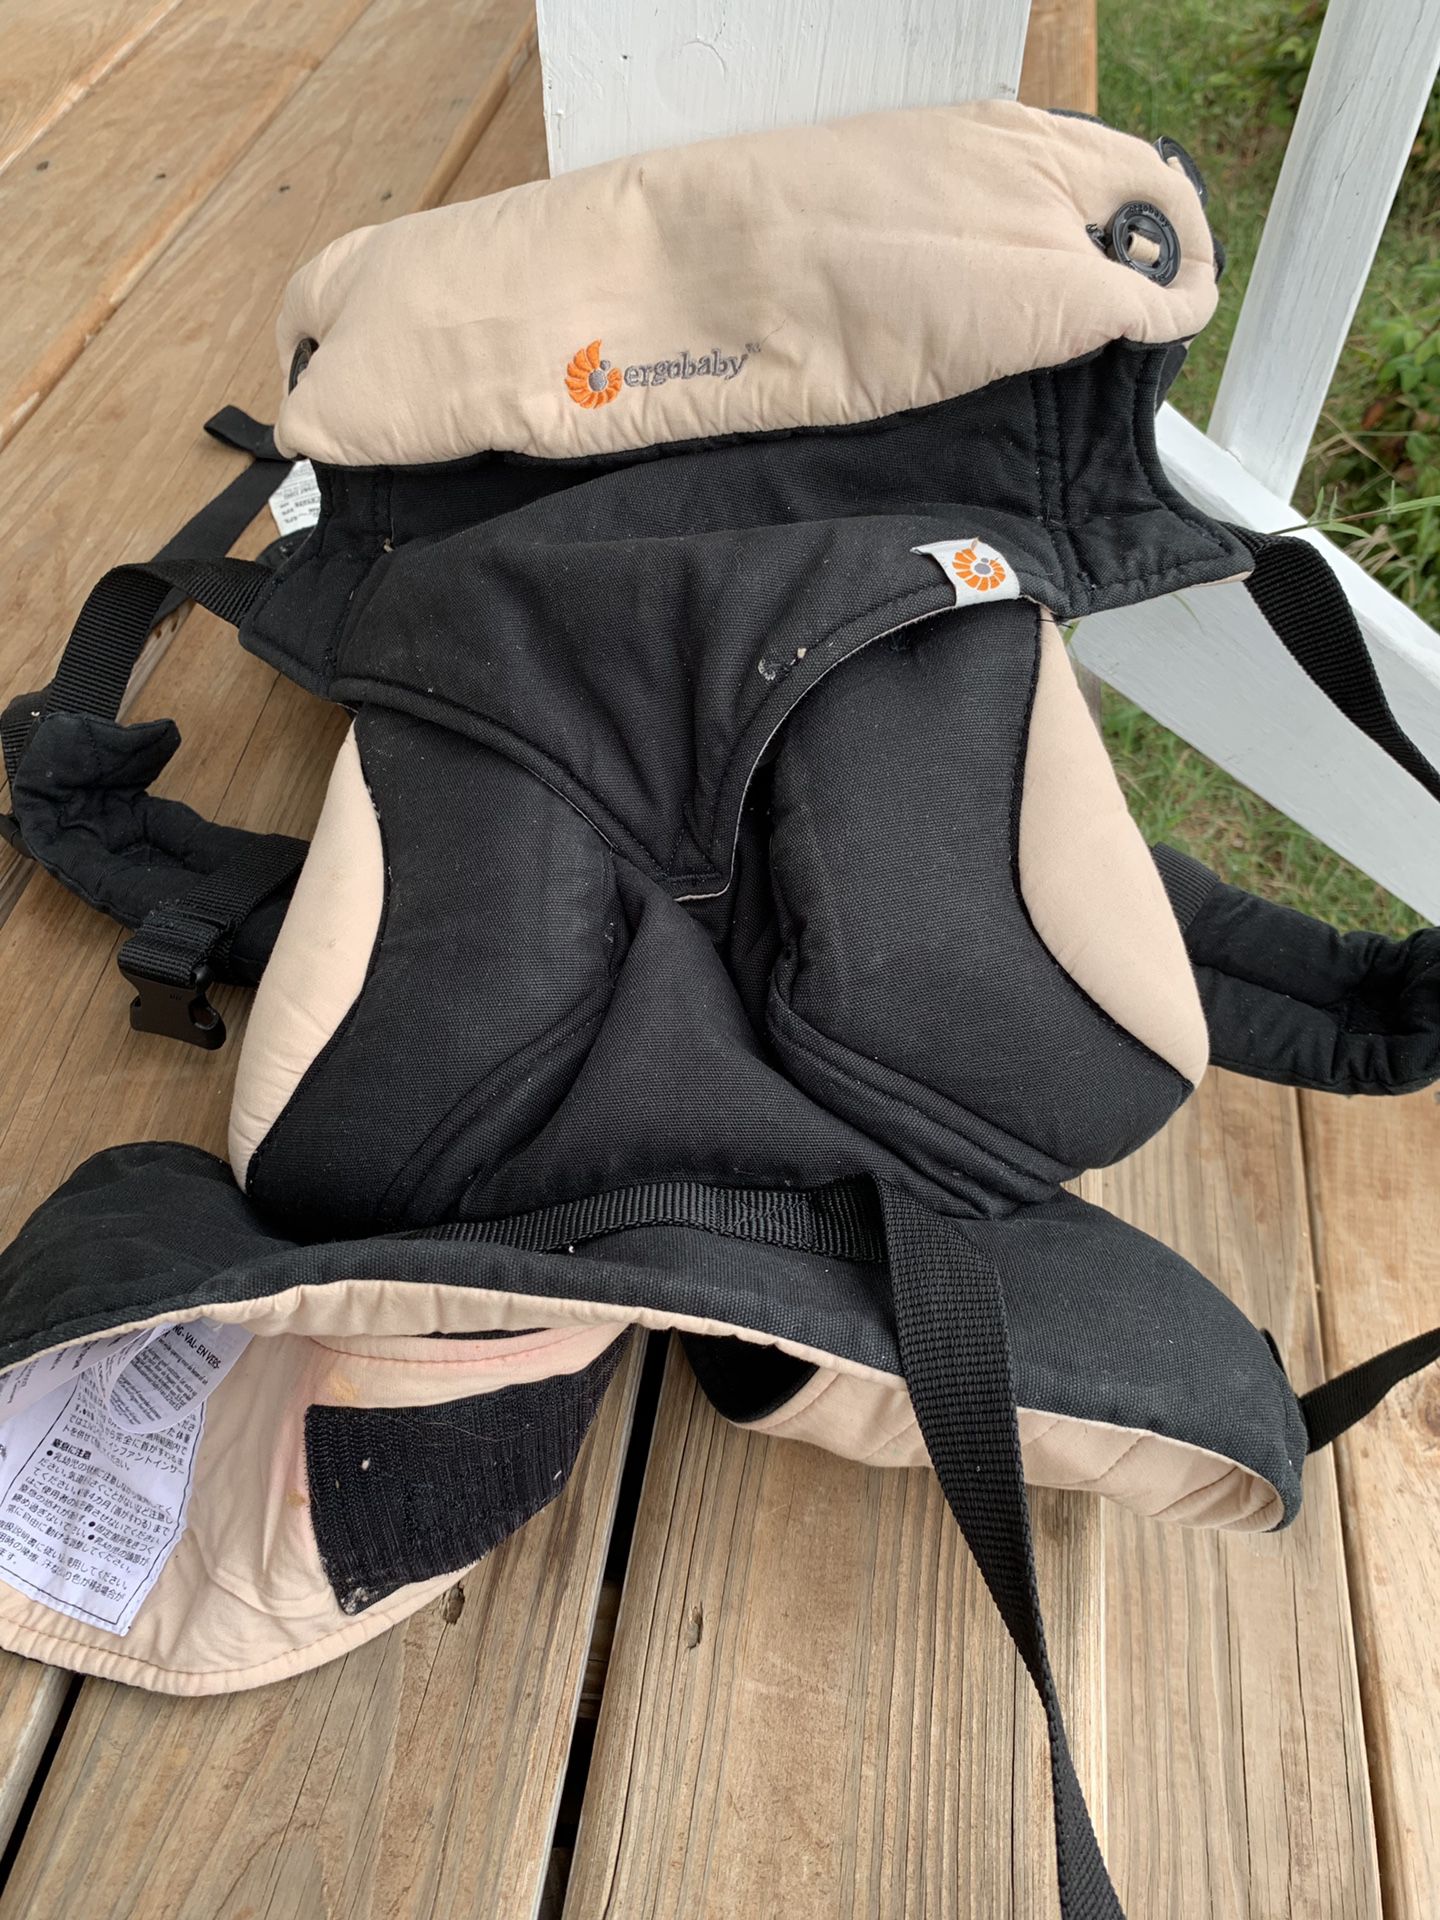 Ergo baby carrier (used)